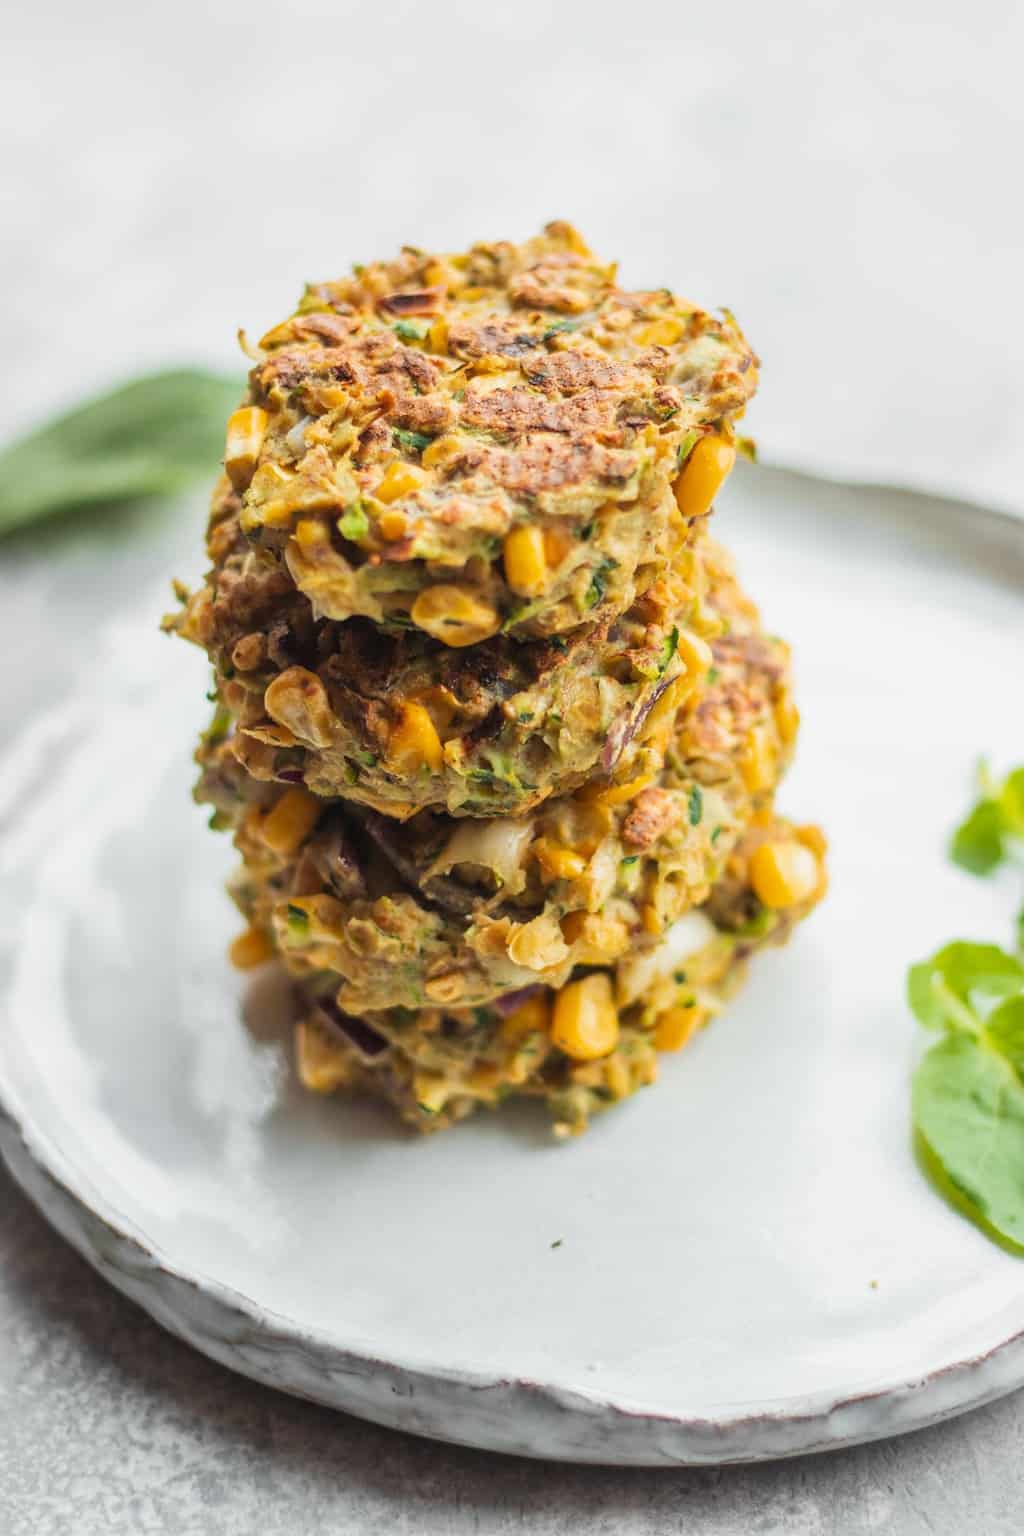 Vegan zucchini fritters with red lentils